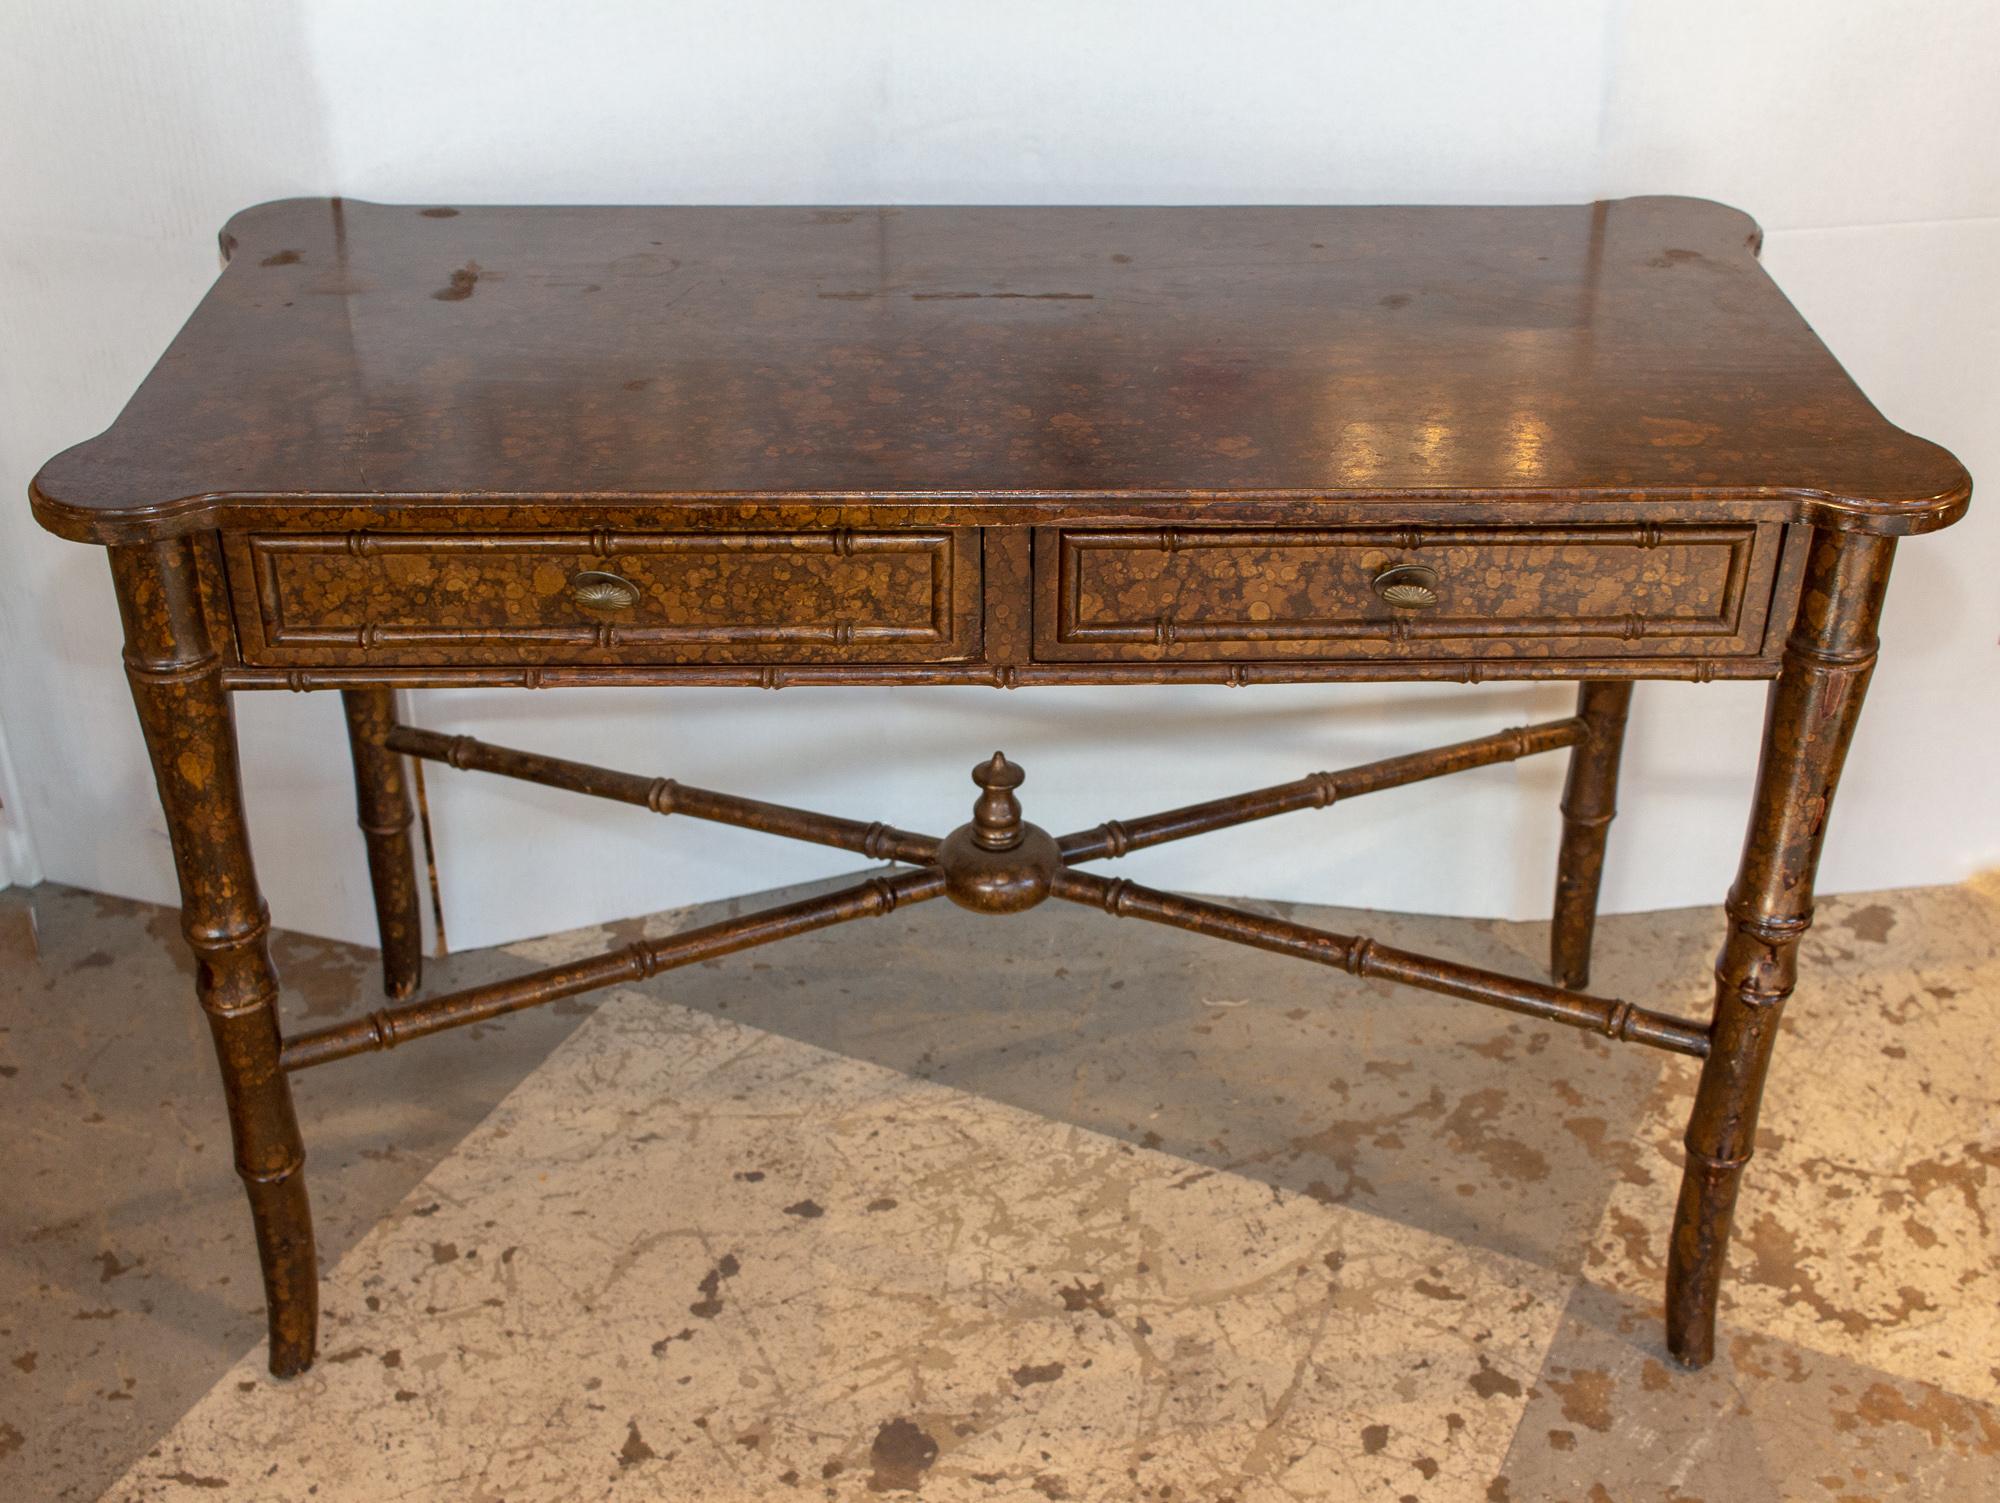 A lovely addition to the home, this vintage wood desk features a stylish bamboo detail and is painted with a lovely turtled / tortoise finish. Includes two pullout / pull-out drawers and a burnished brass pull. Signs of wear are seen on this piece